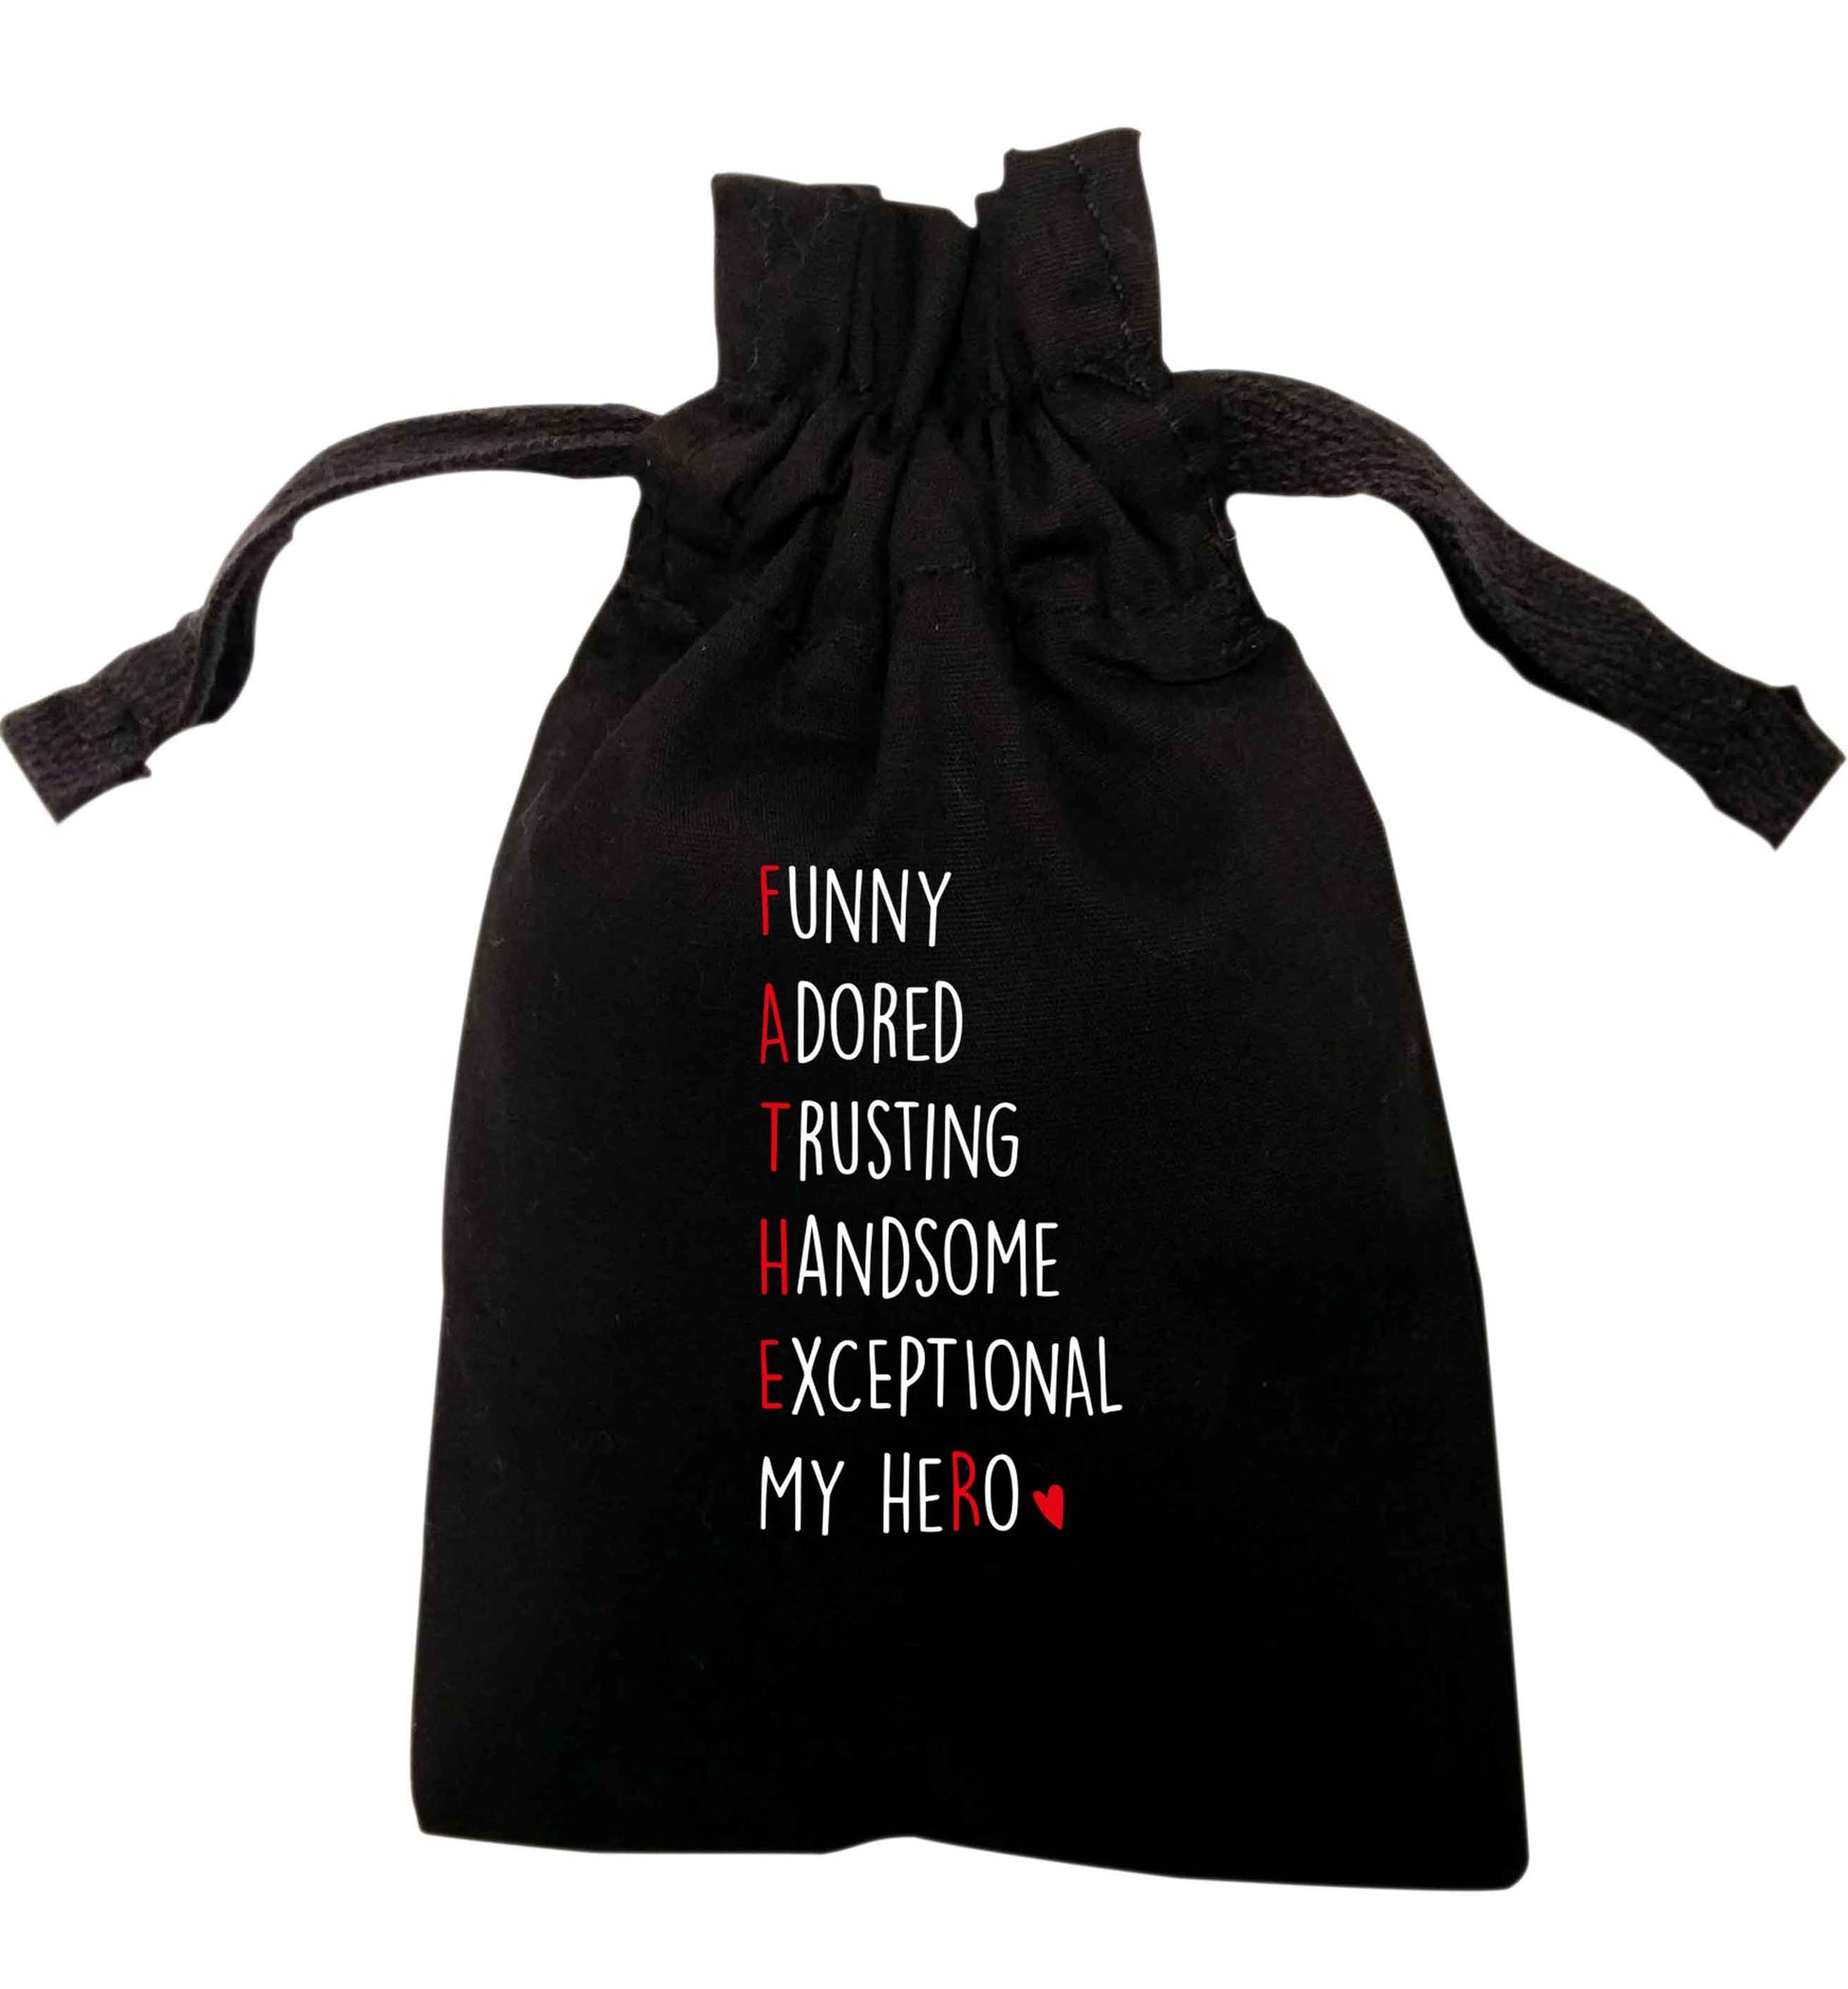 Father meaning hero acrostic poem | XS - L | Pouch / Drawstring bag / Sack  | Organic Cotton | Bulk discounts available!